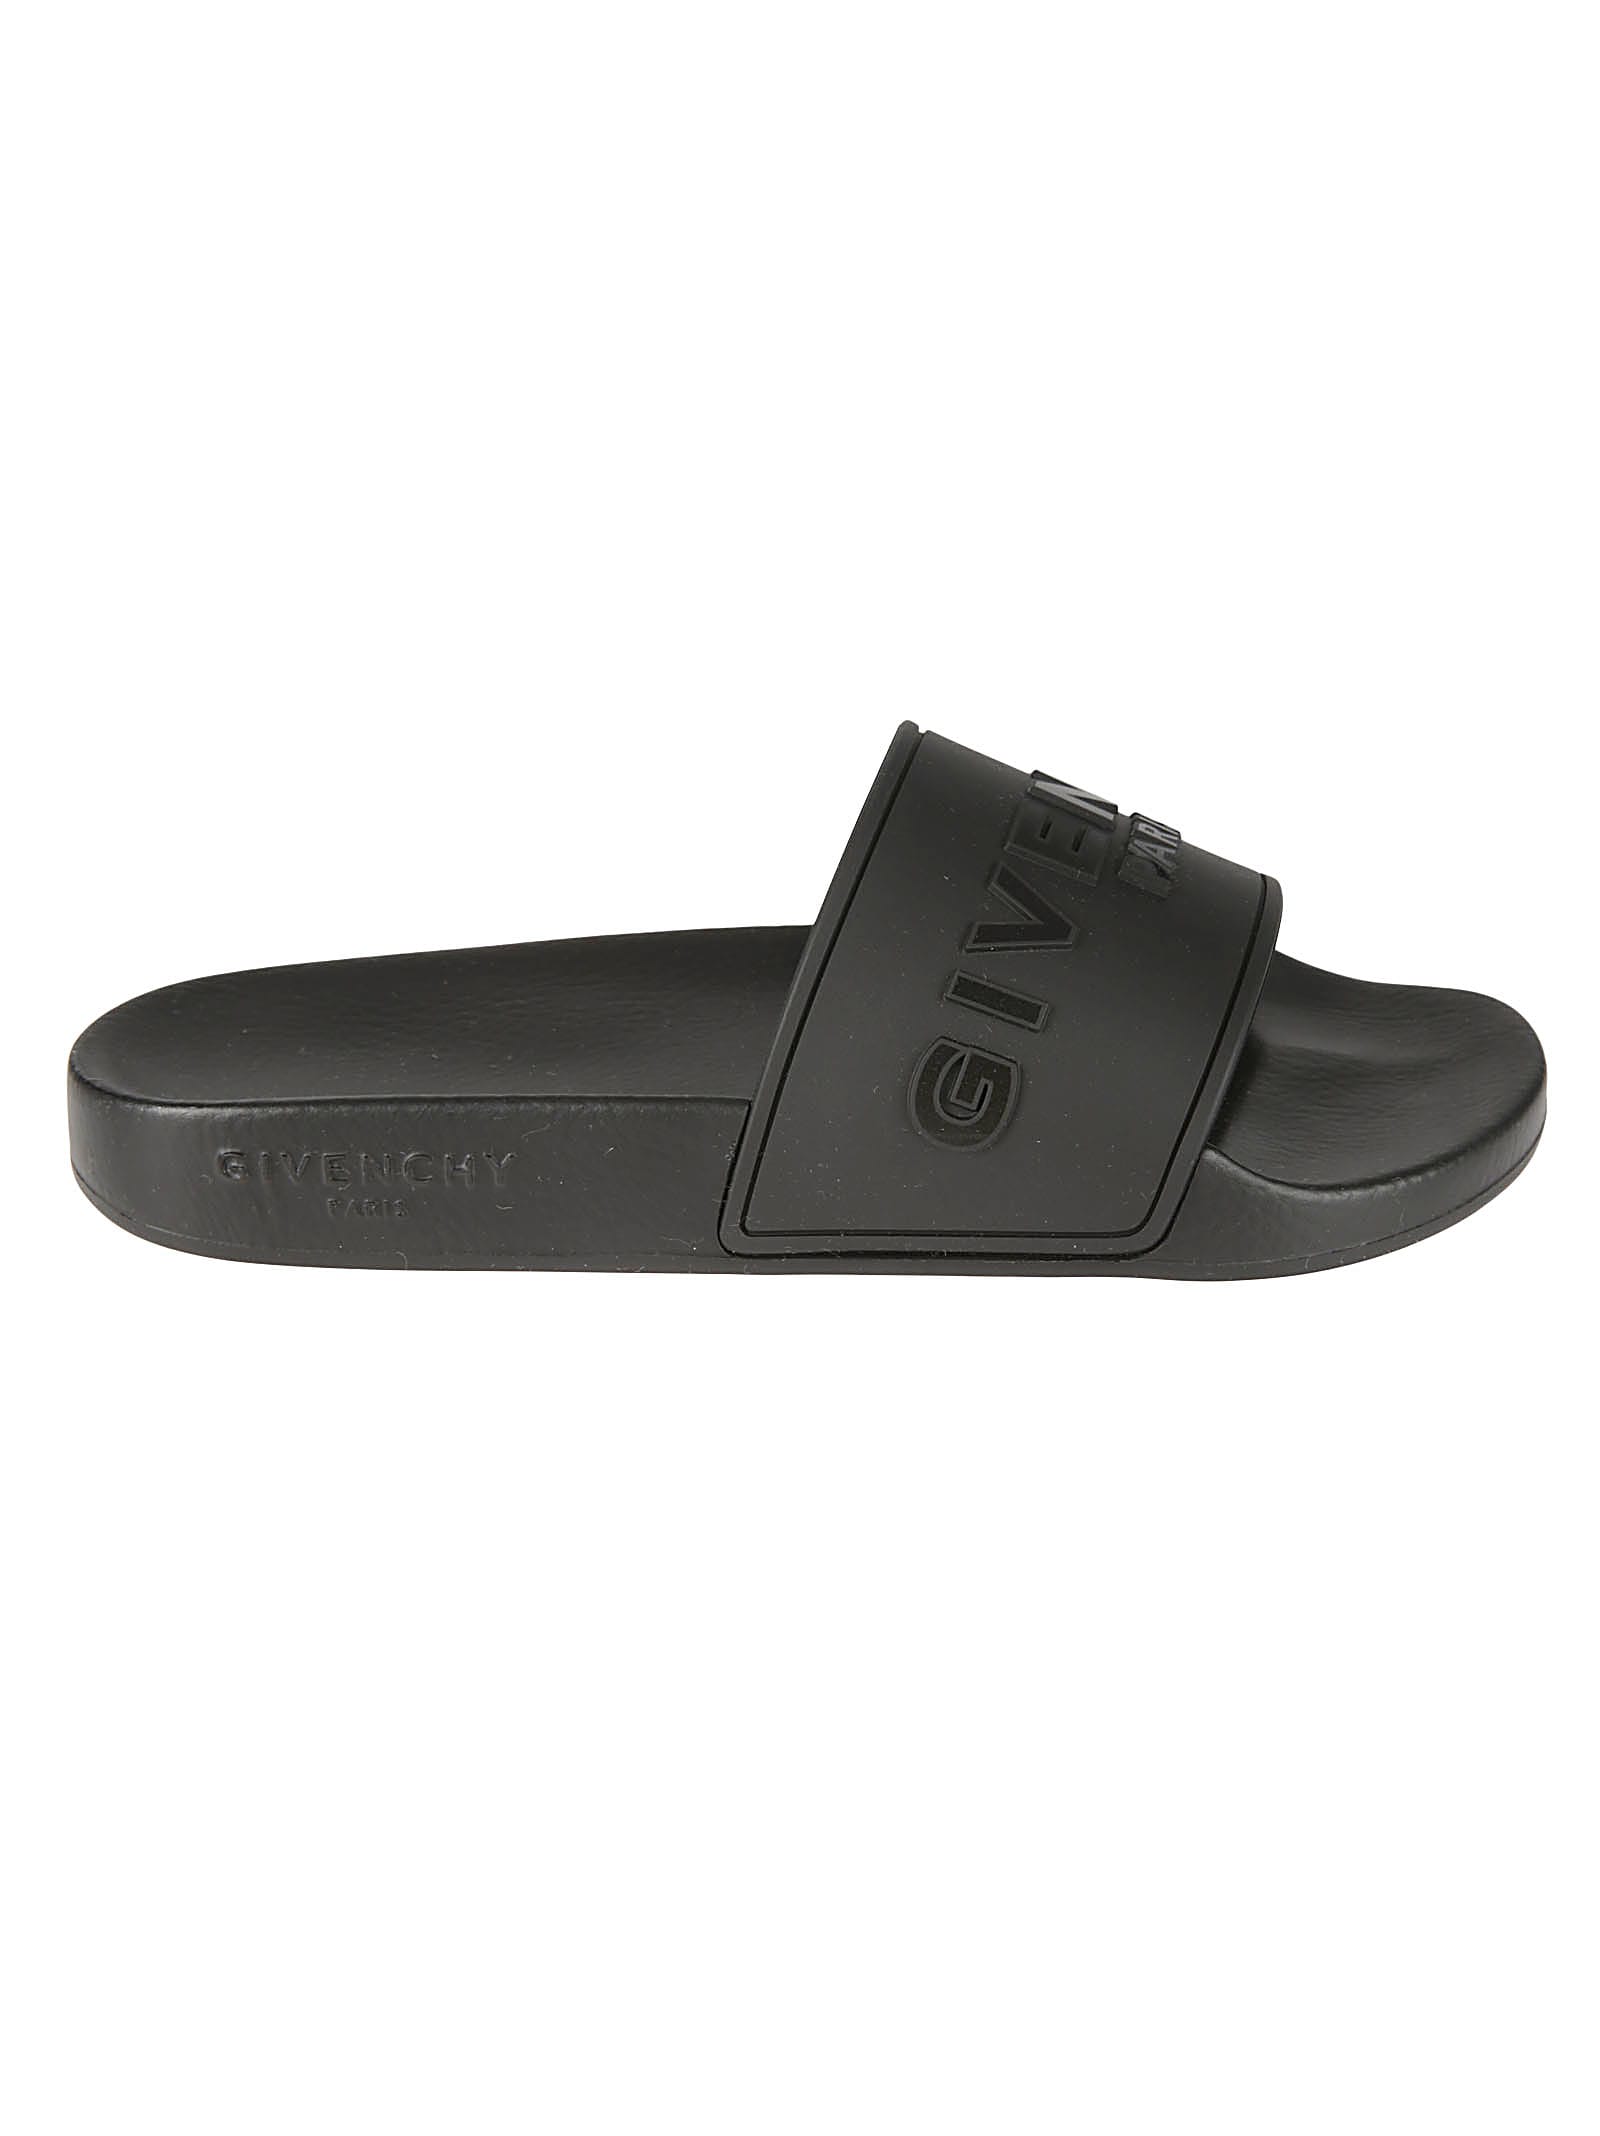 GIVENCHY EMBOSSED LOGO SLIDERS,BE3004 E127001